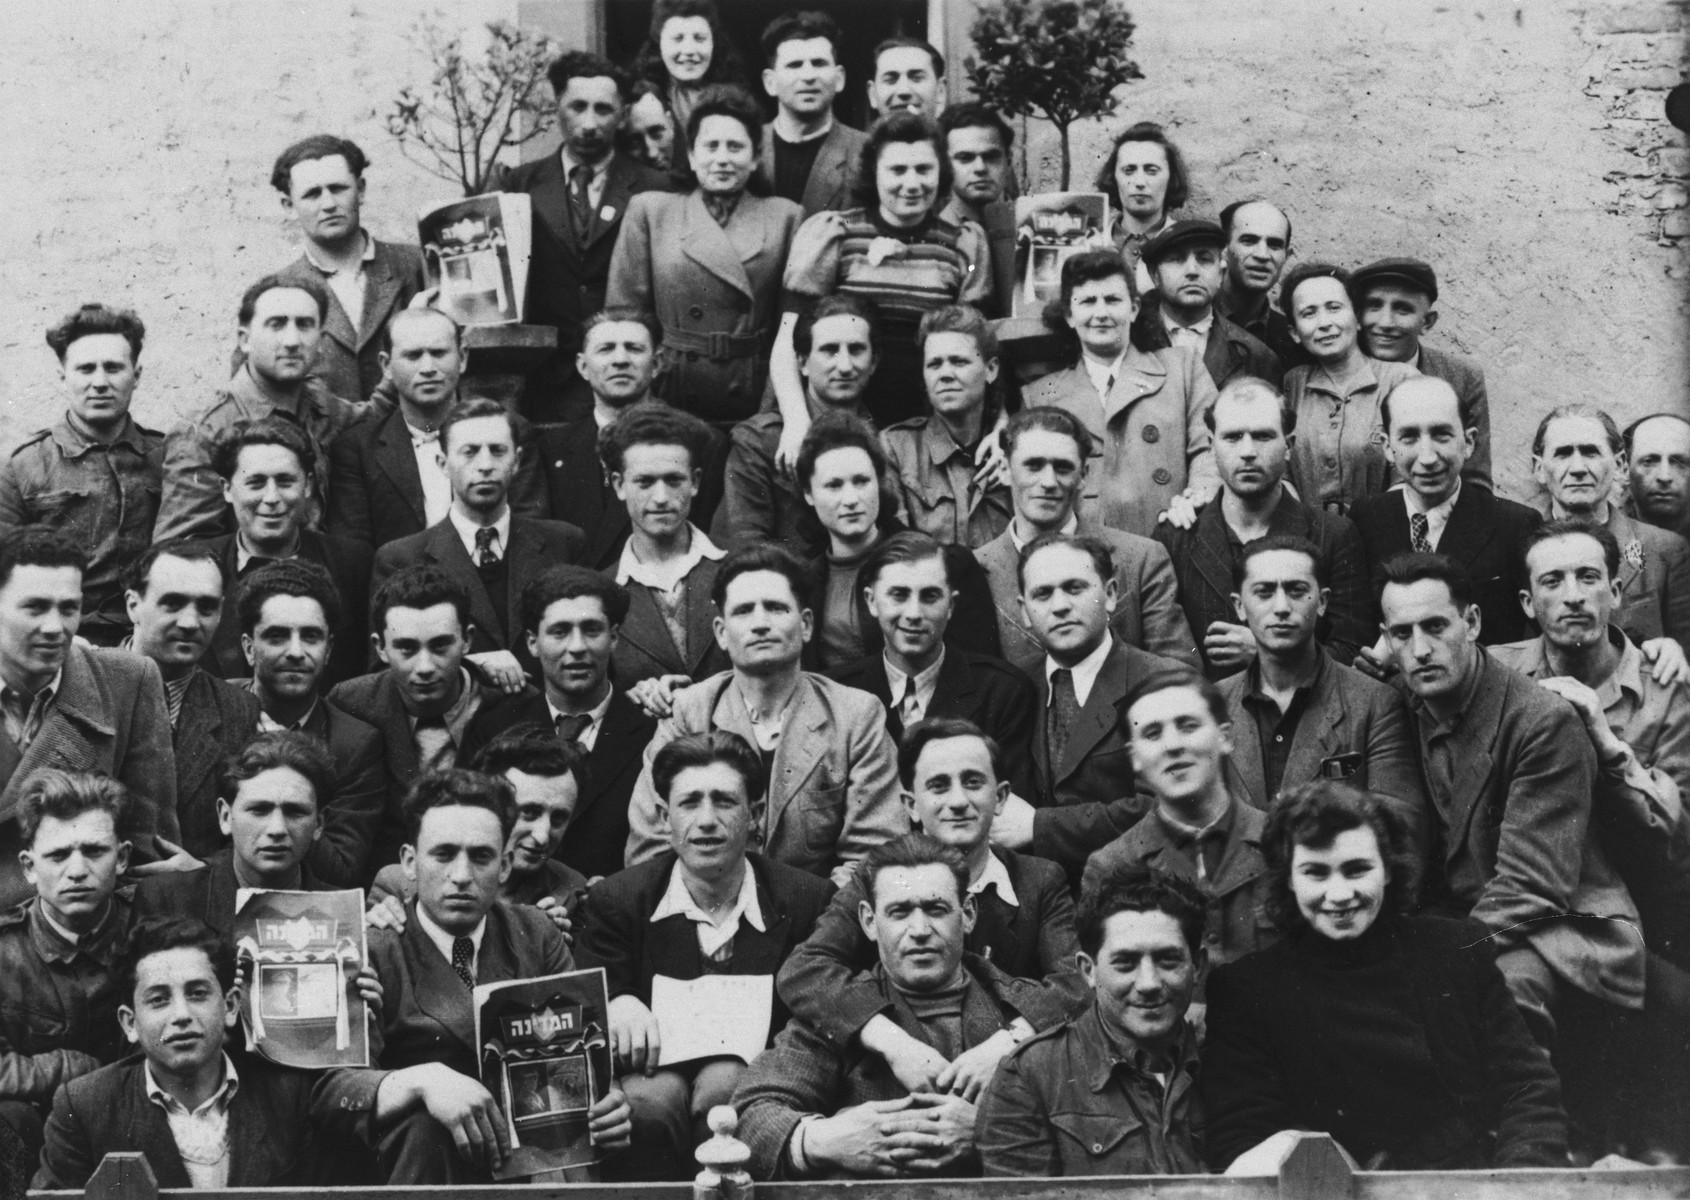 Group portrait of Jewish DPs in the Lampertheim displaced persons camp, some of whom are holding magazines.

Among those pictured is Izak Lachter (front row, second from the left, holding a dark covered periodical).  In one of the middle rows on the far right, wearing a hat is Chaim Kuperstock.  To his right is his wife, Esther (nee Lang) Kuperstock.  Pictured in the back row, middle, is Mosze Najman.  His wife, Perla Najman, is standing in front of him, to the left.